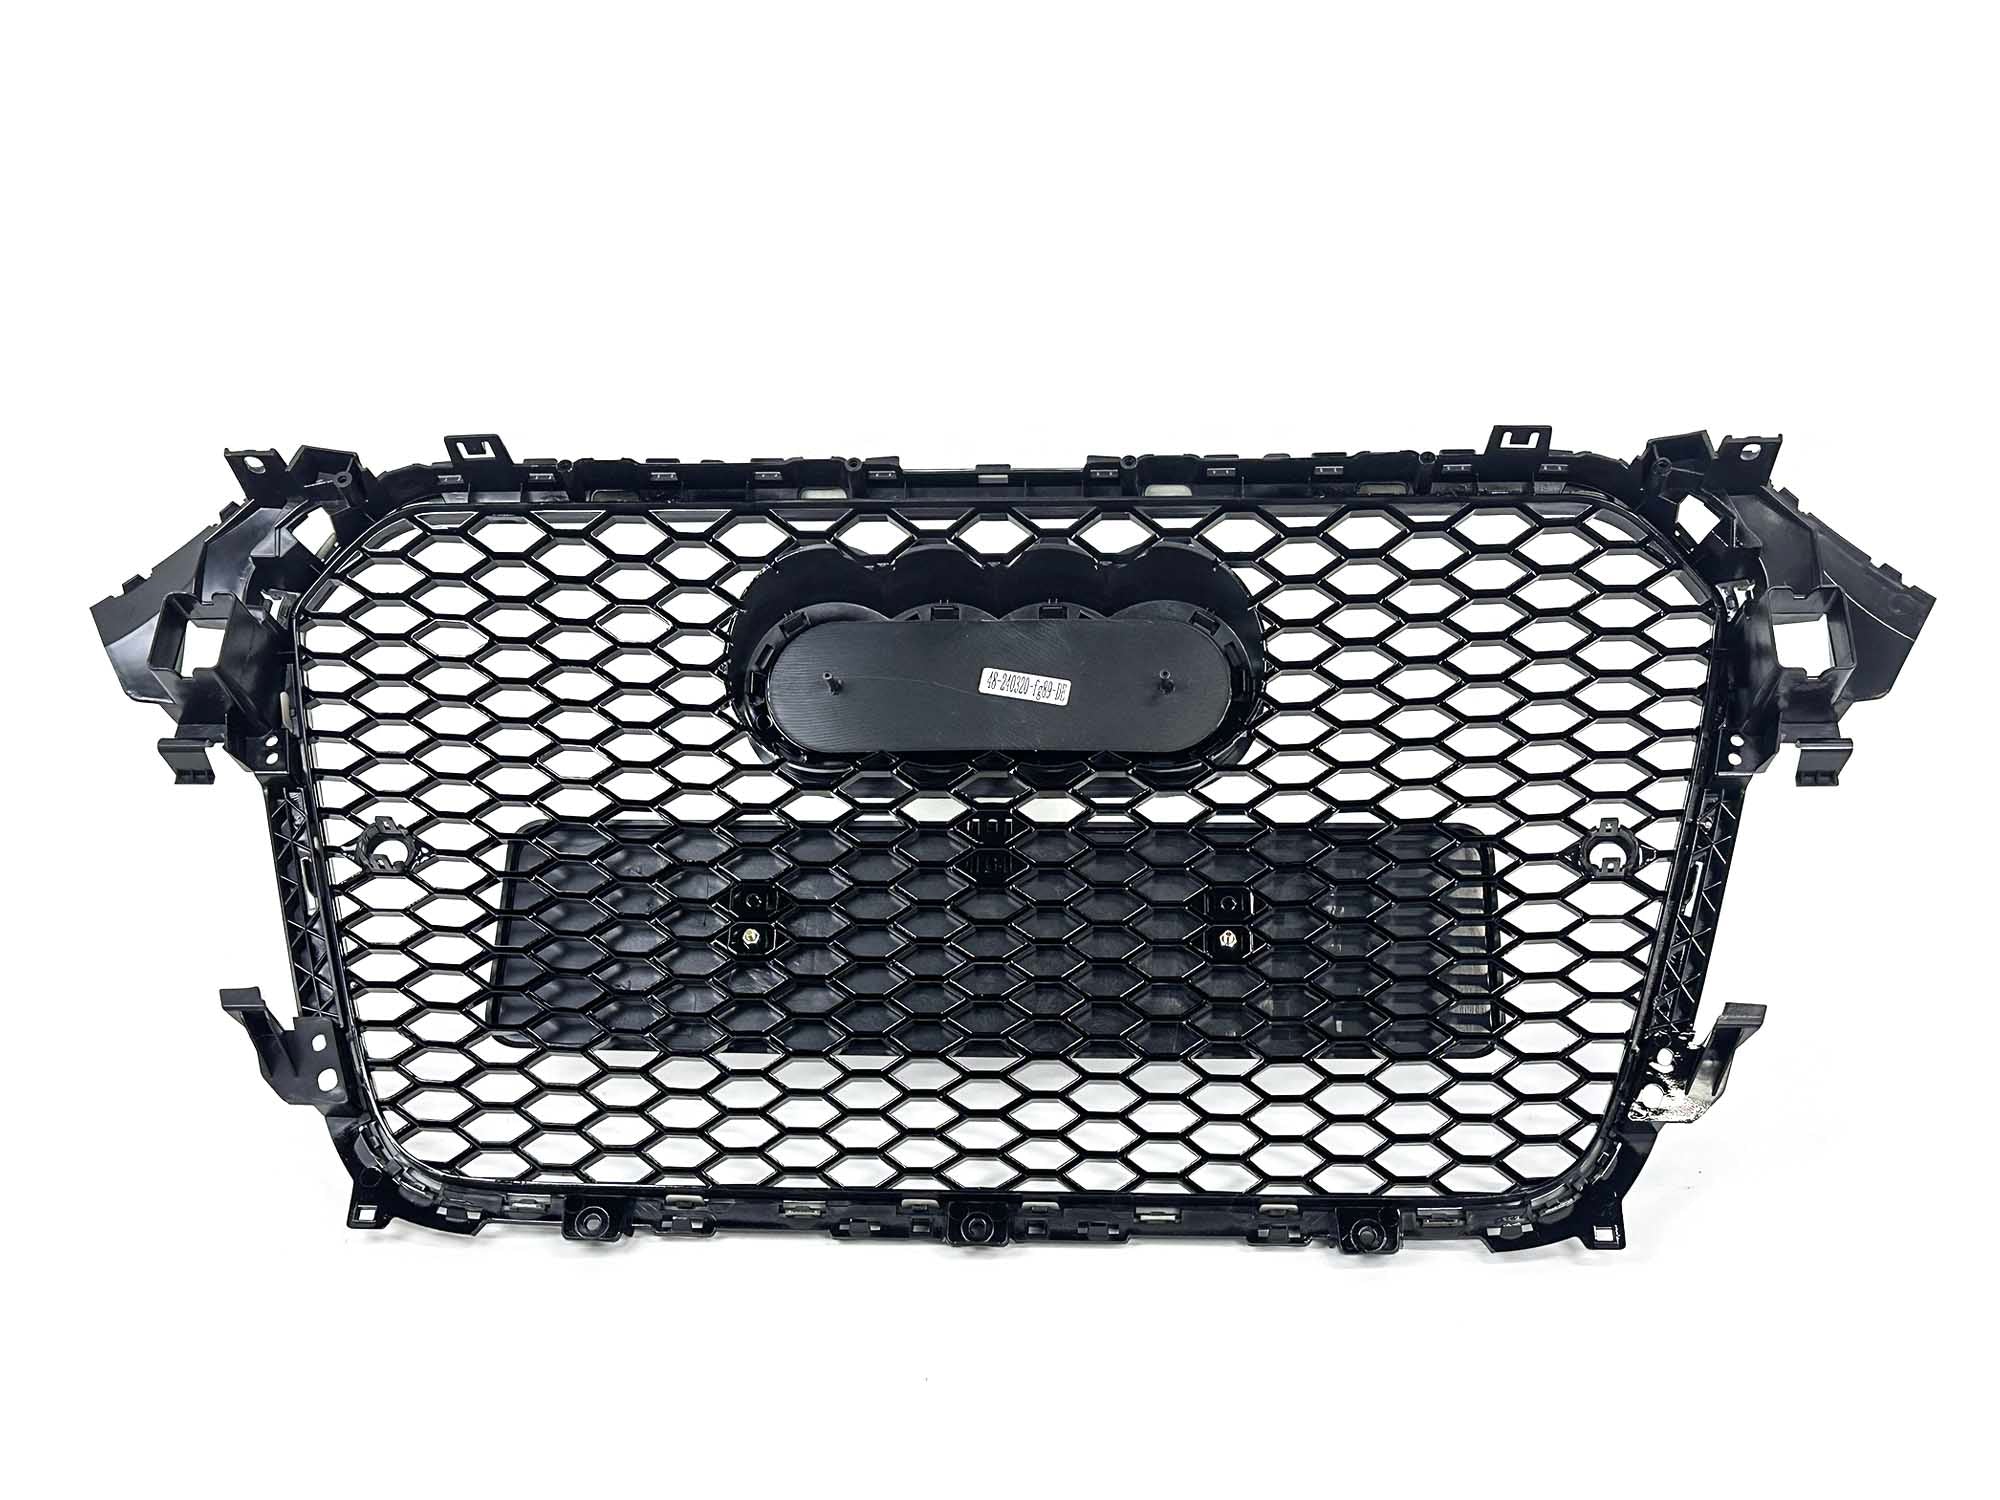 S4 Grill Kühlergrill Wabengrill Frontgrill für AUDI A4 B8.5 Avant S-Line Facelift 2012-2015 fg89